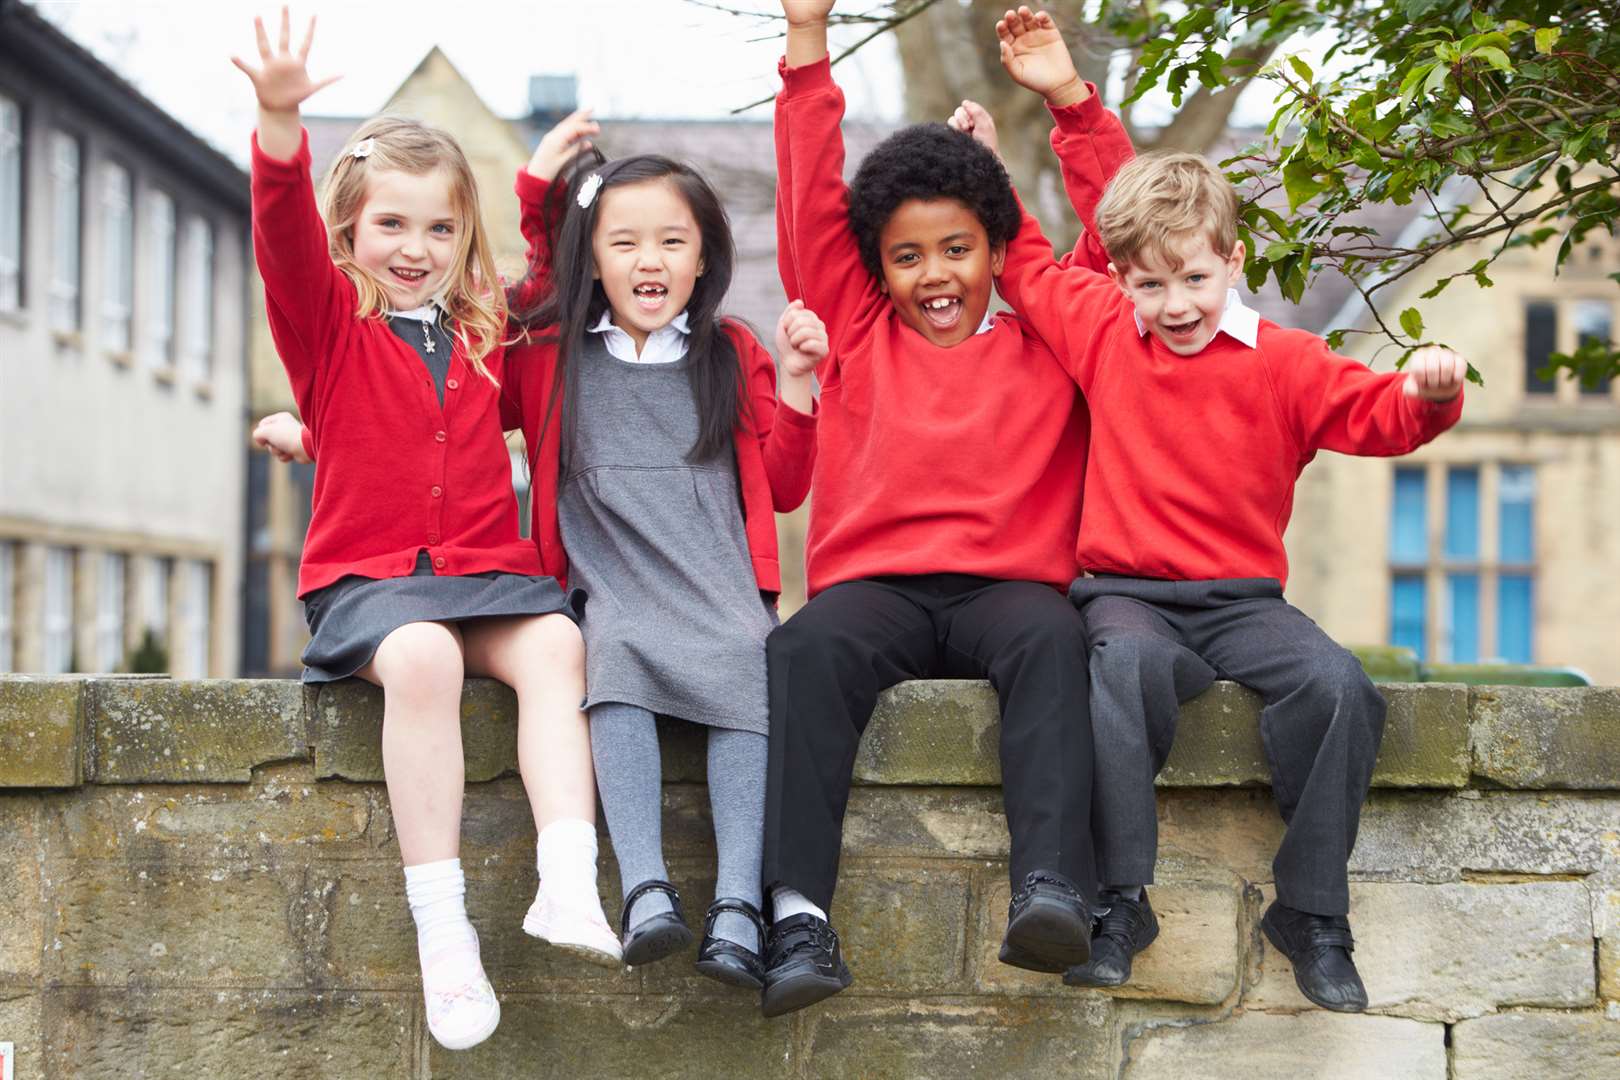 If you're enthusiastic about your school, your child is also likely to be